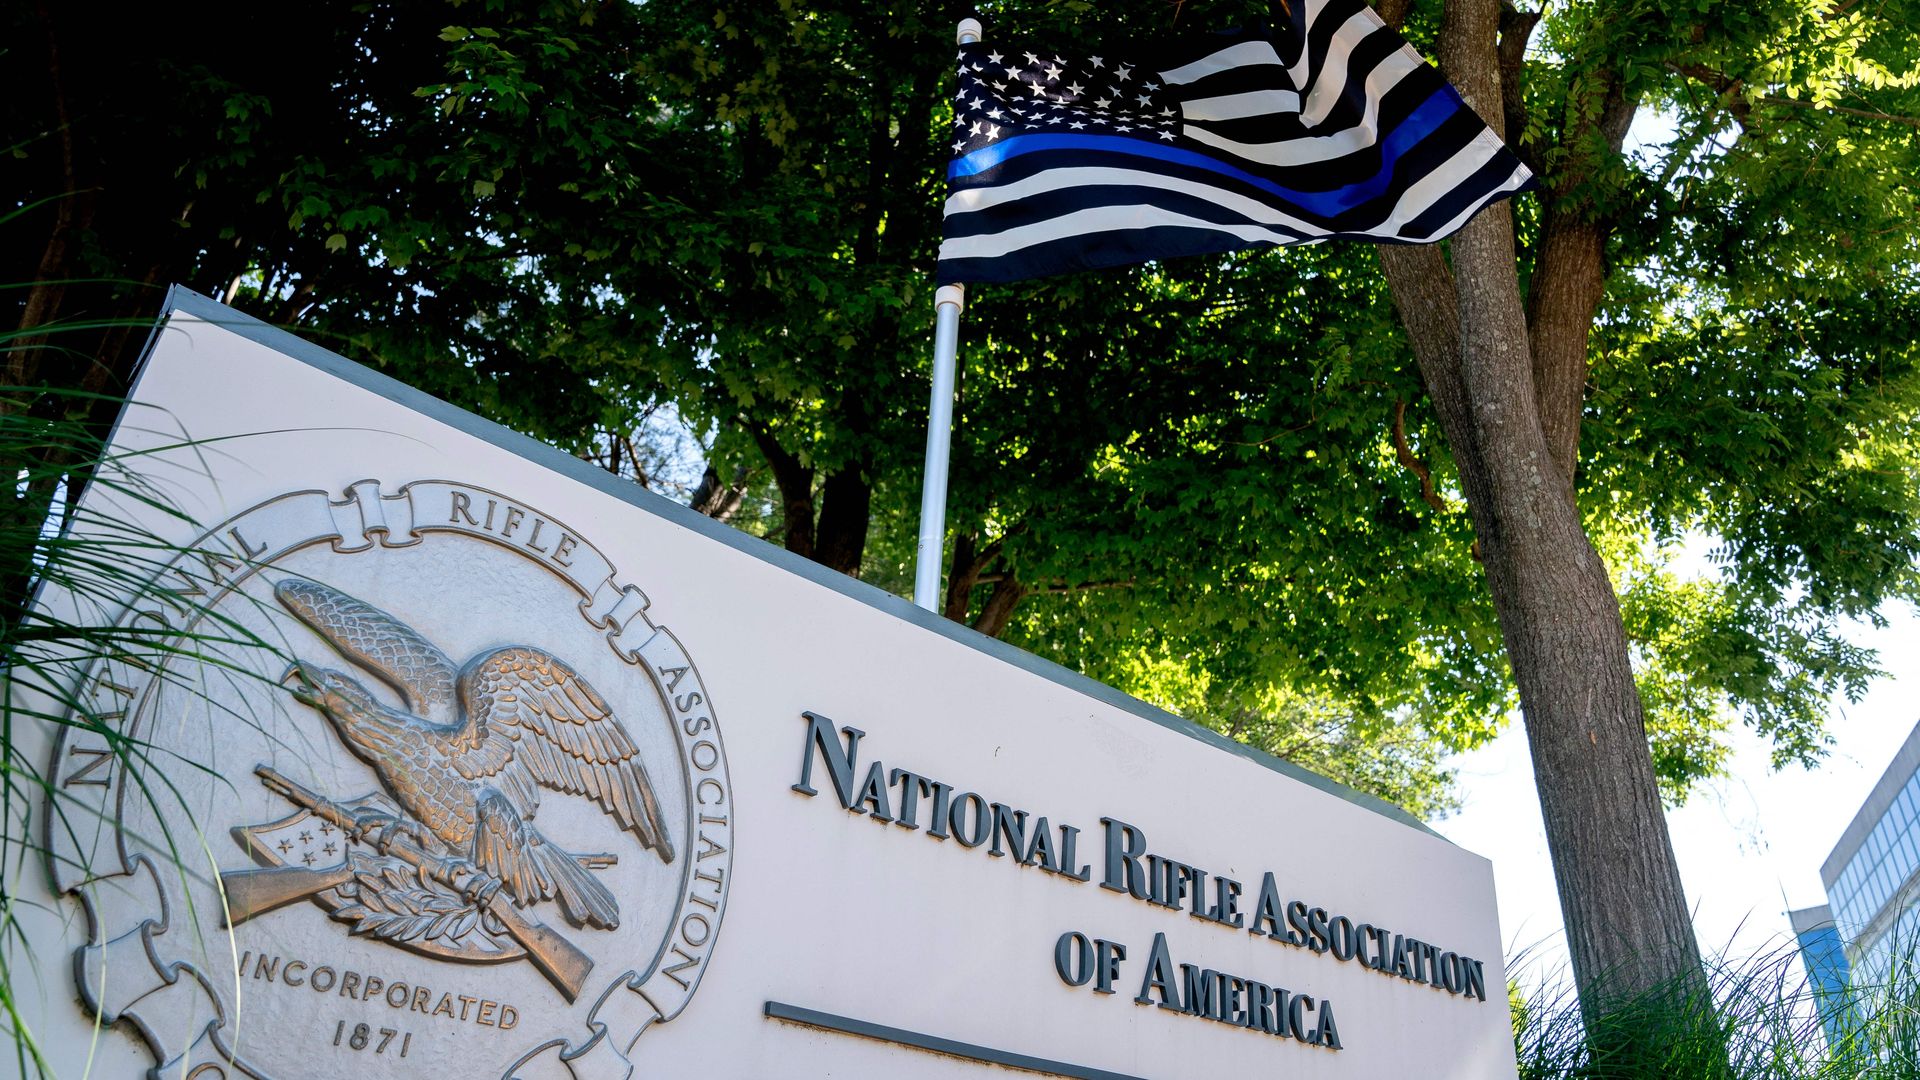 A thin blue line flag, signaling support for law enforcement, is displayed above the sign for the National Rifle Association (NRA) outside of its headquarters.